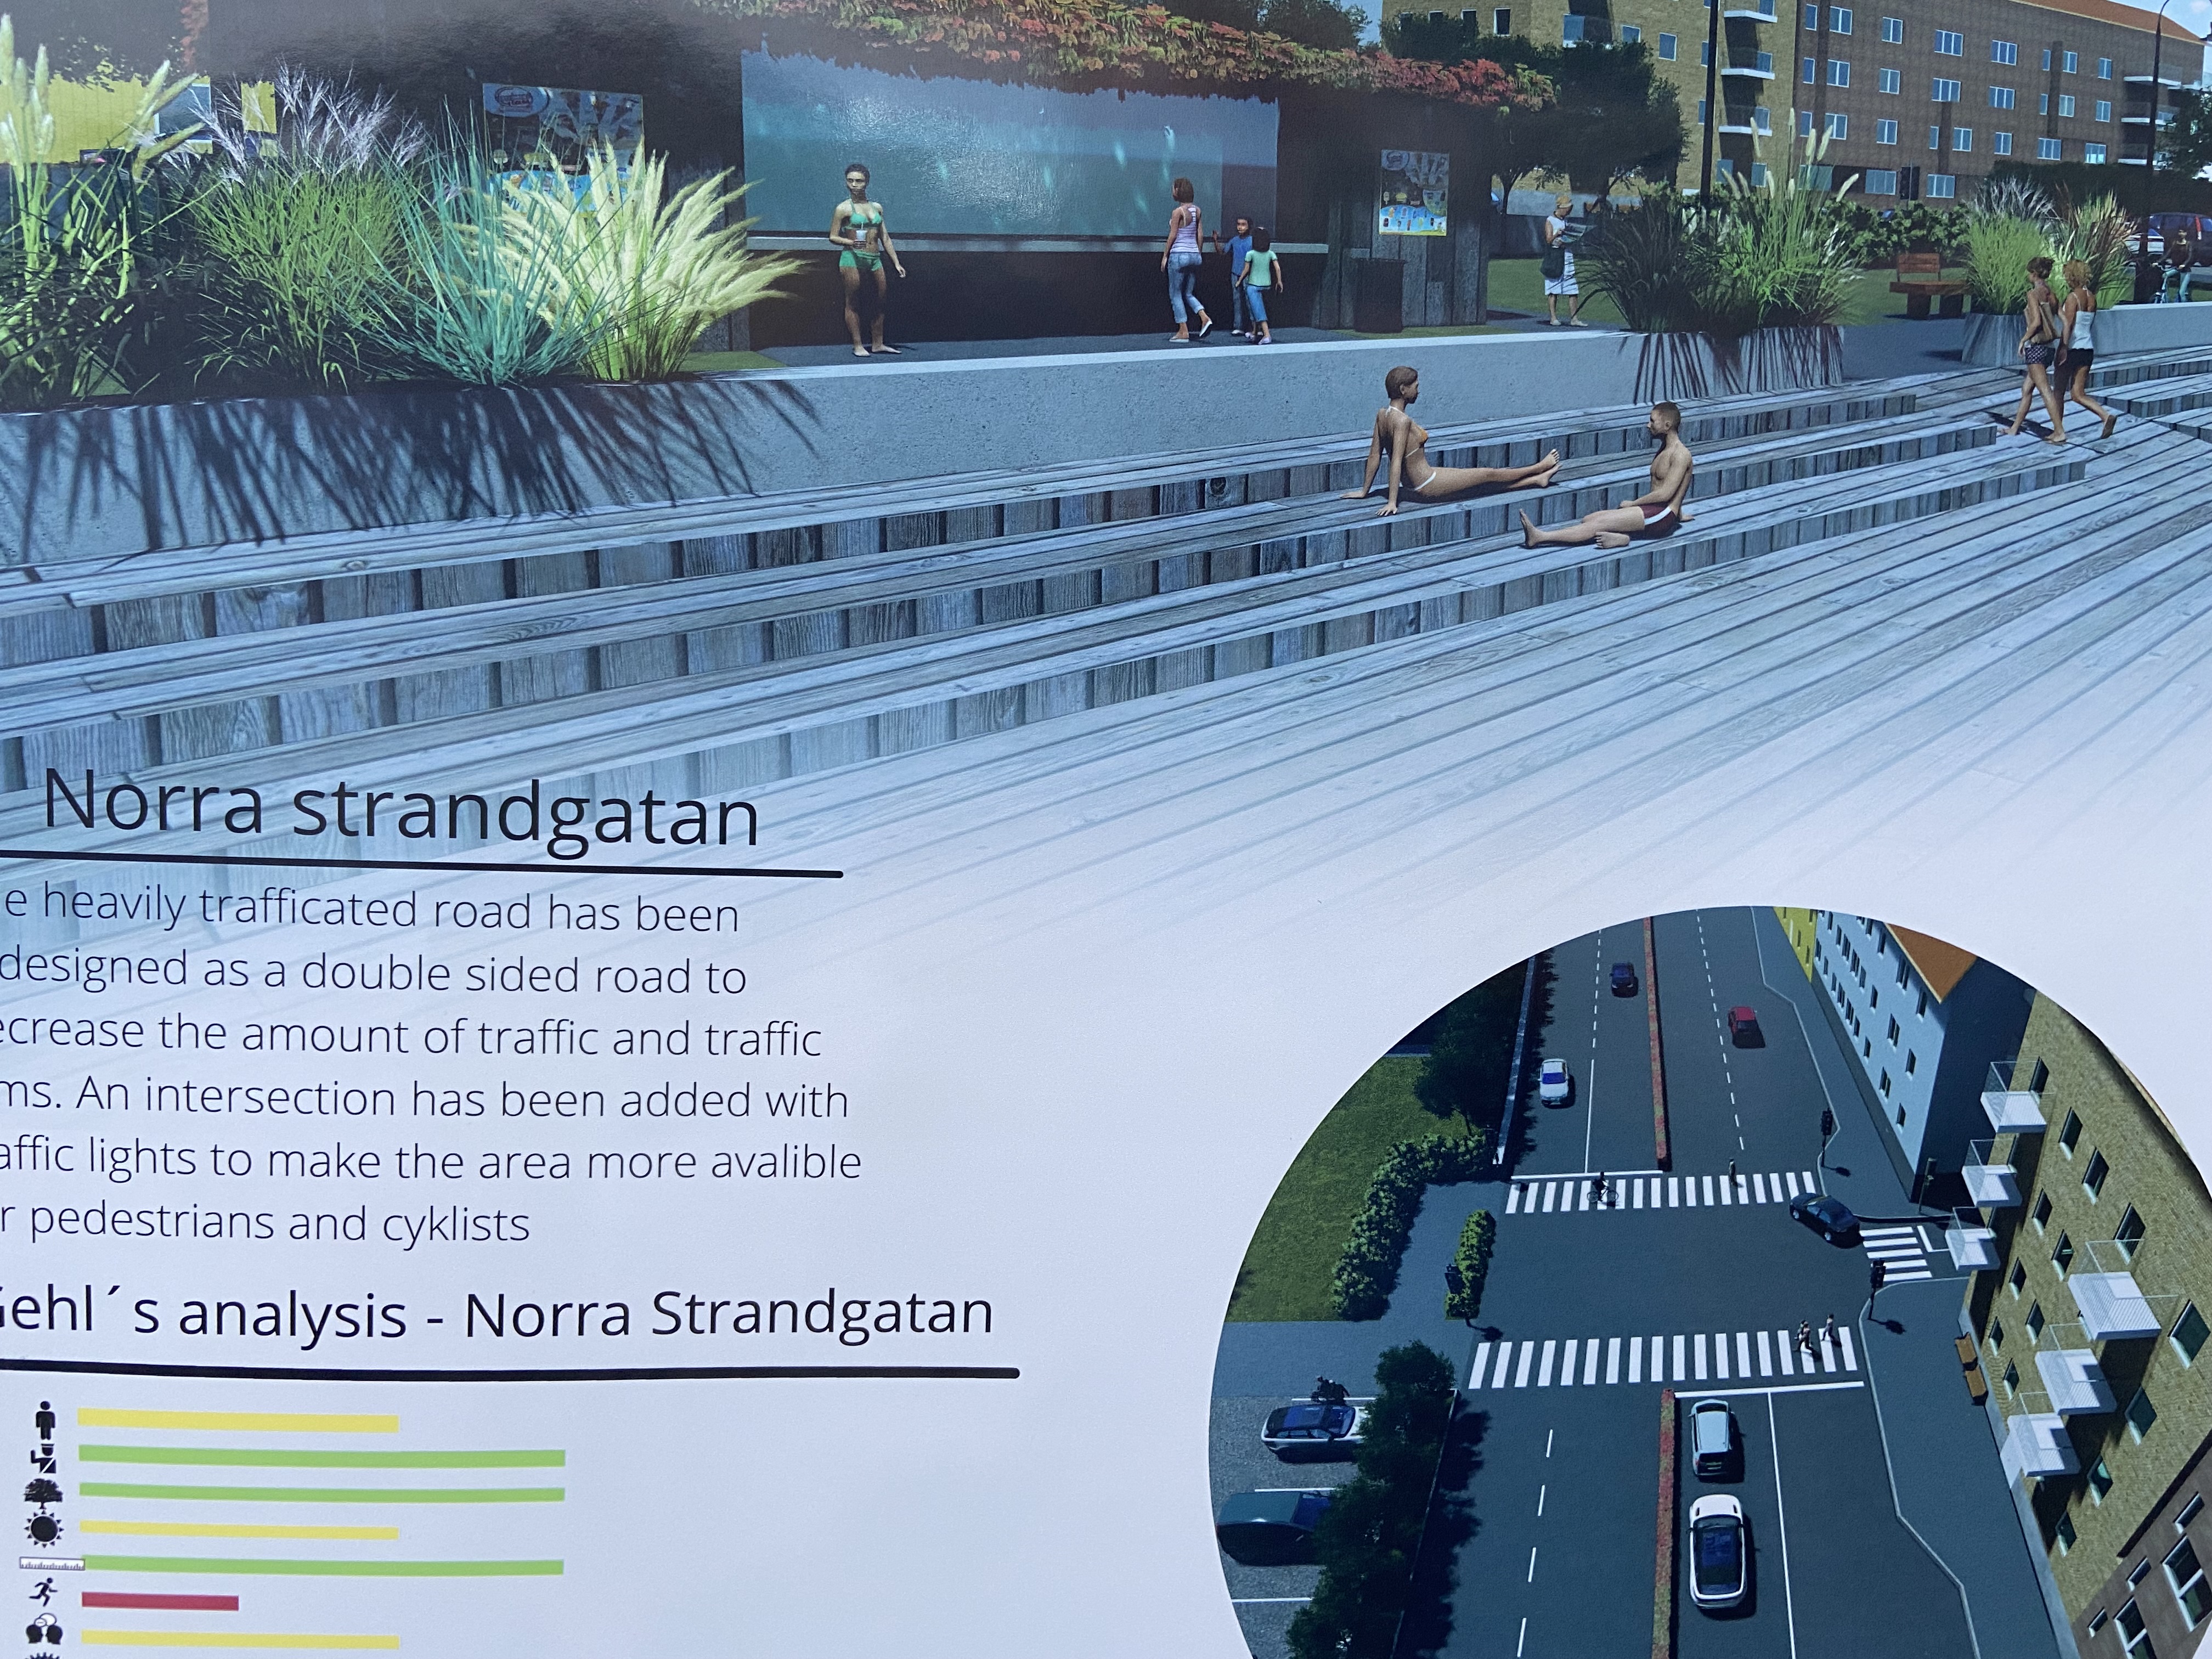 Several students have chosen to highlight Vätterstranden along Norra Strandgatan in different ways, here through a large wooden deck.